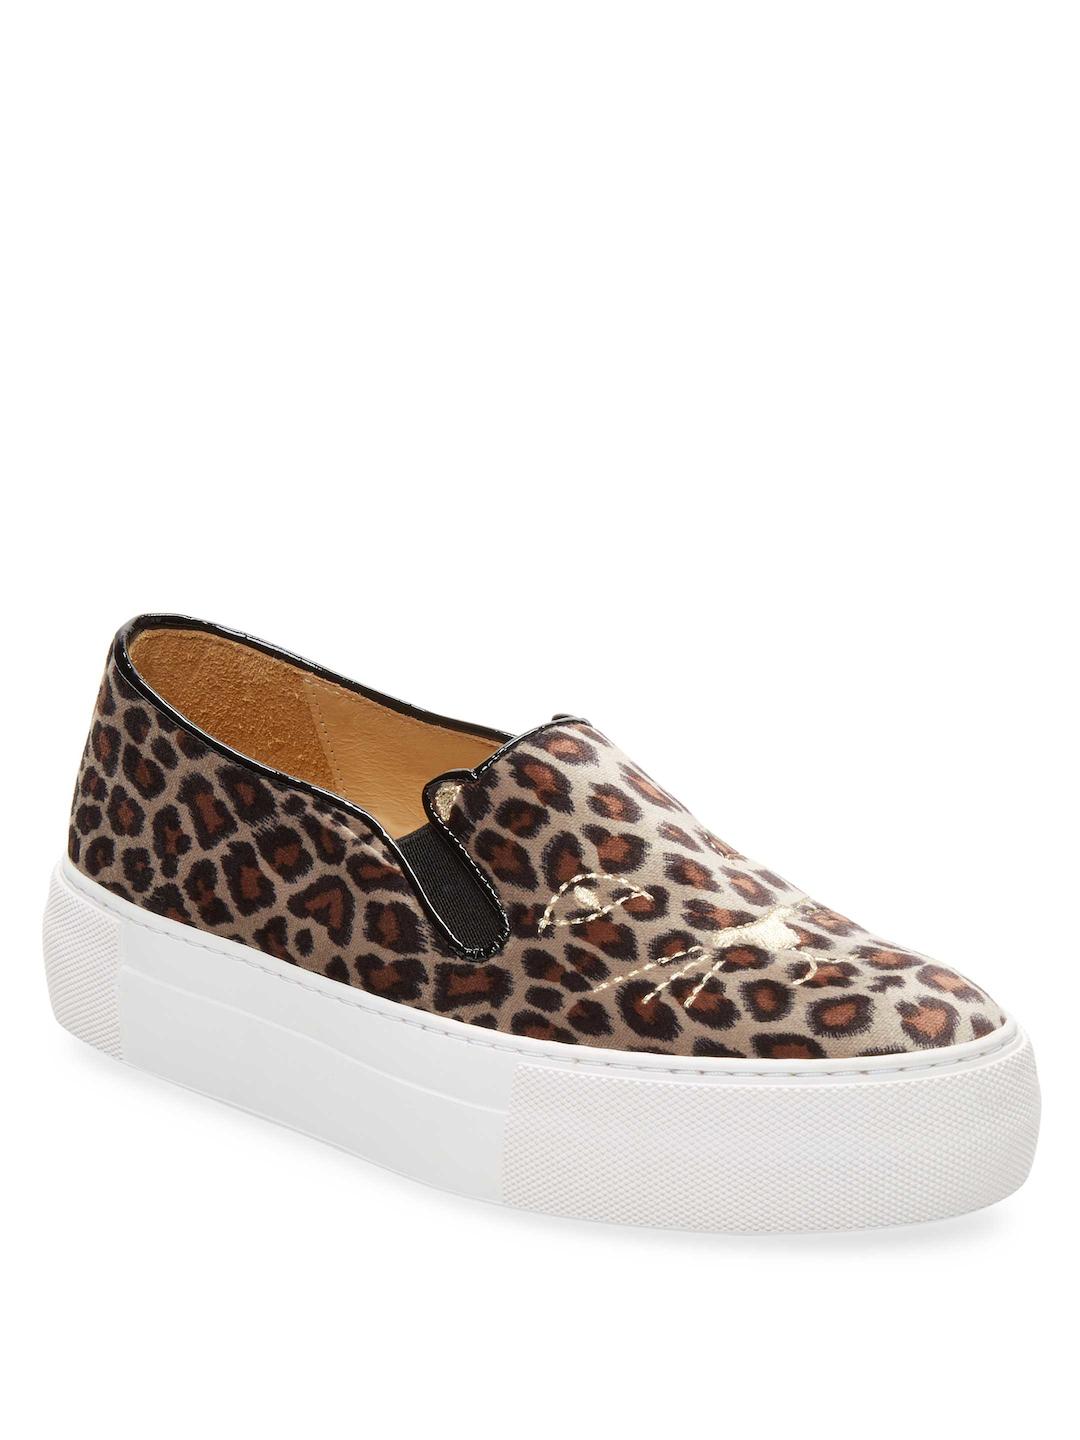 Charlotte Olympia Leather Leopard 